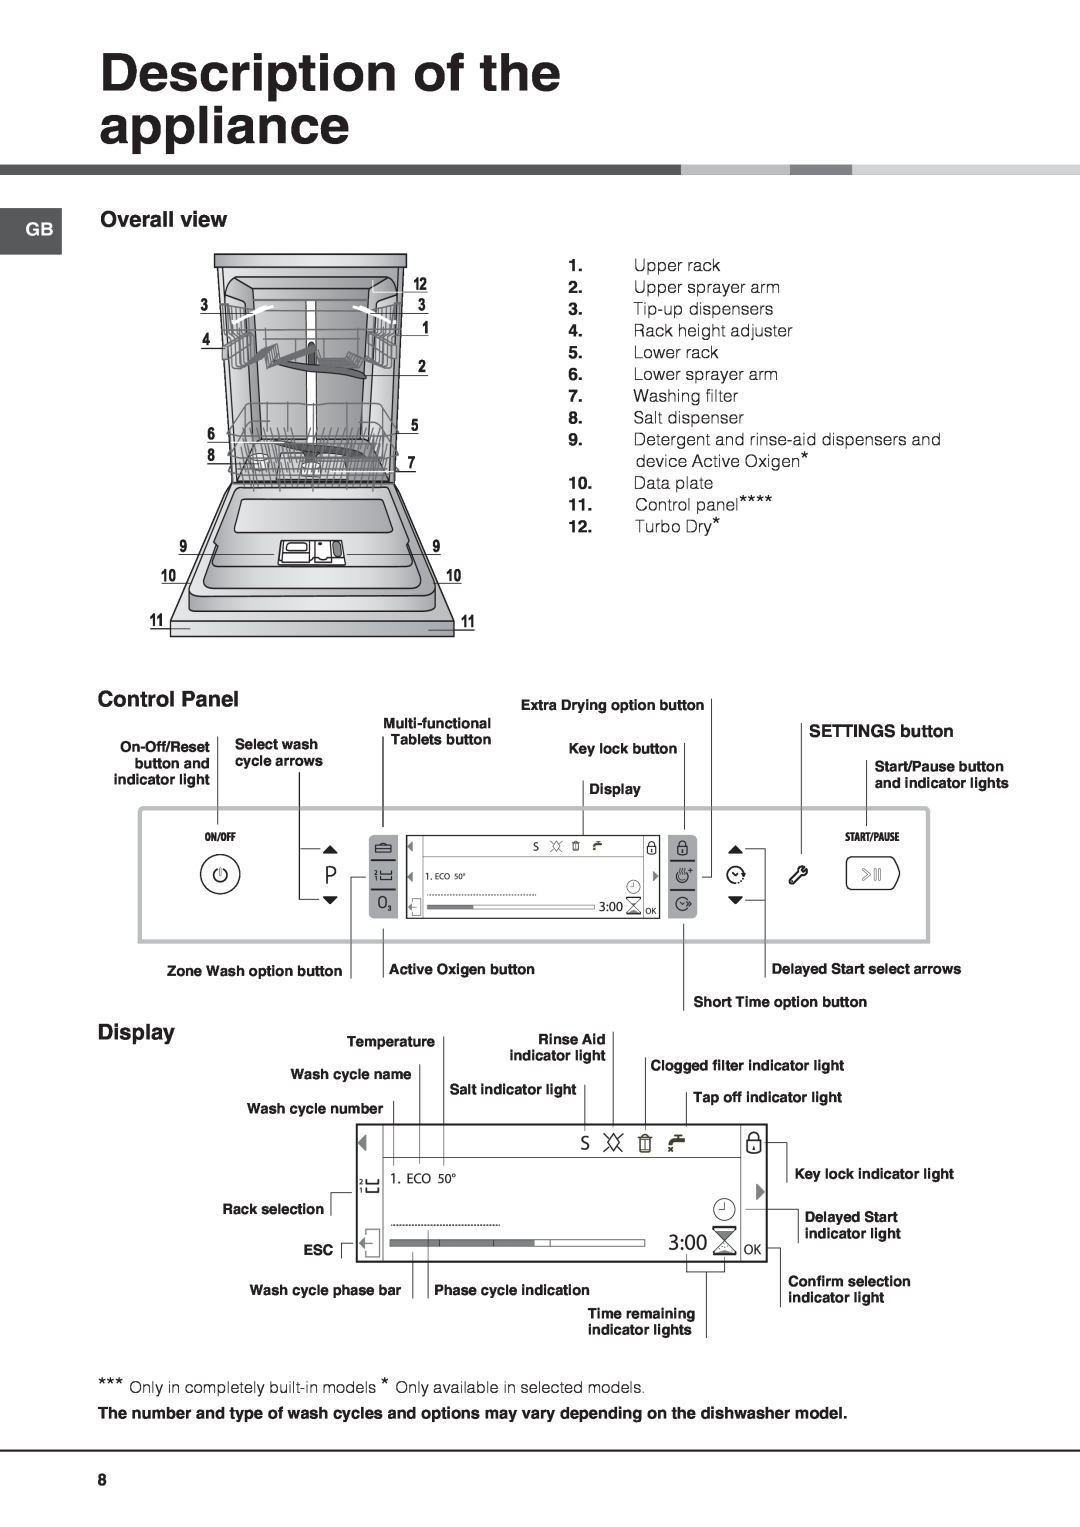 Hotpoint ULTIMA, FDUD 43133 manual Description of the appliance, Overall view, Control Panel, Display, SETTINGS button 